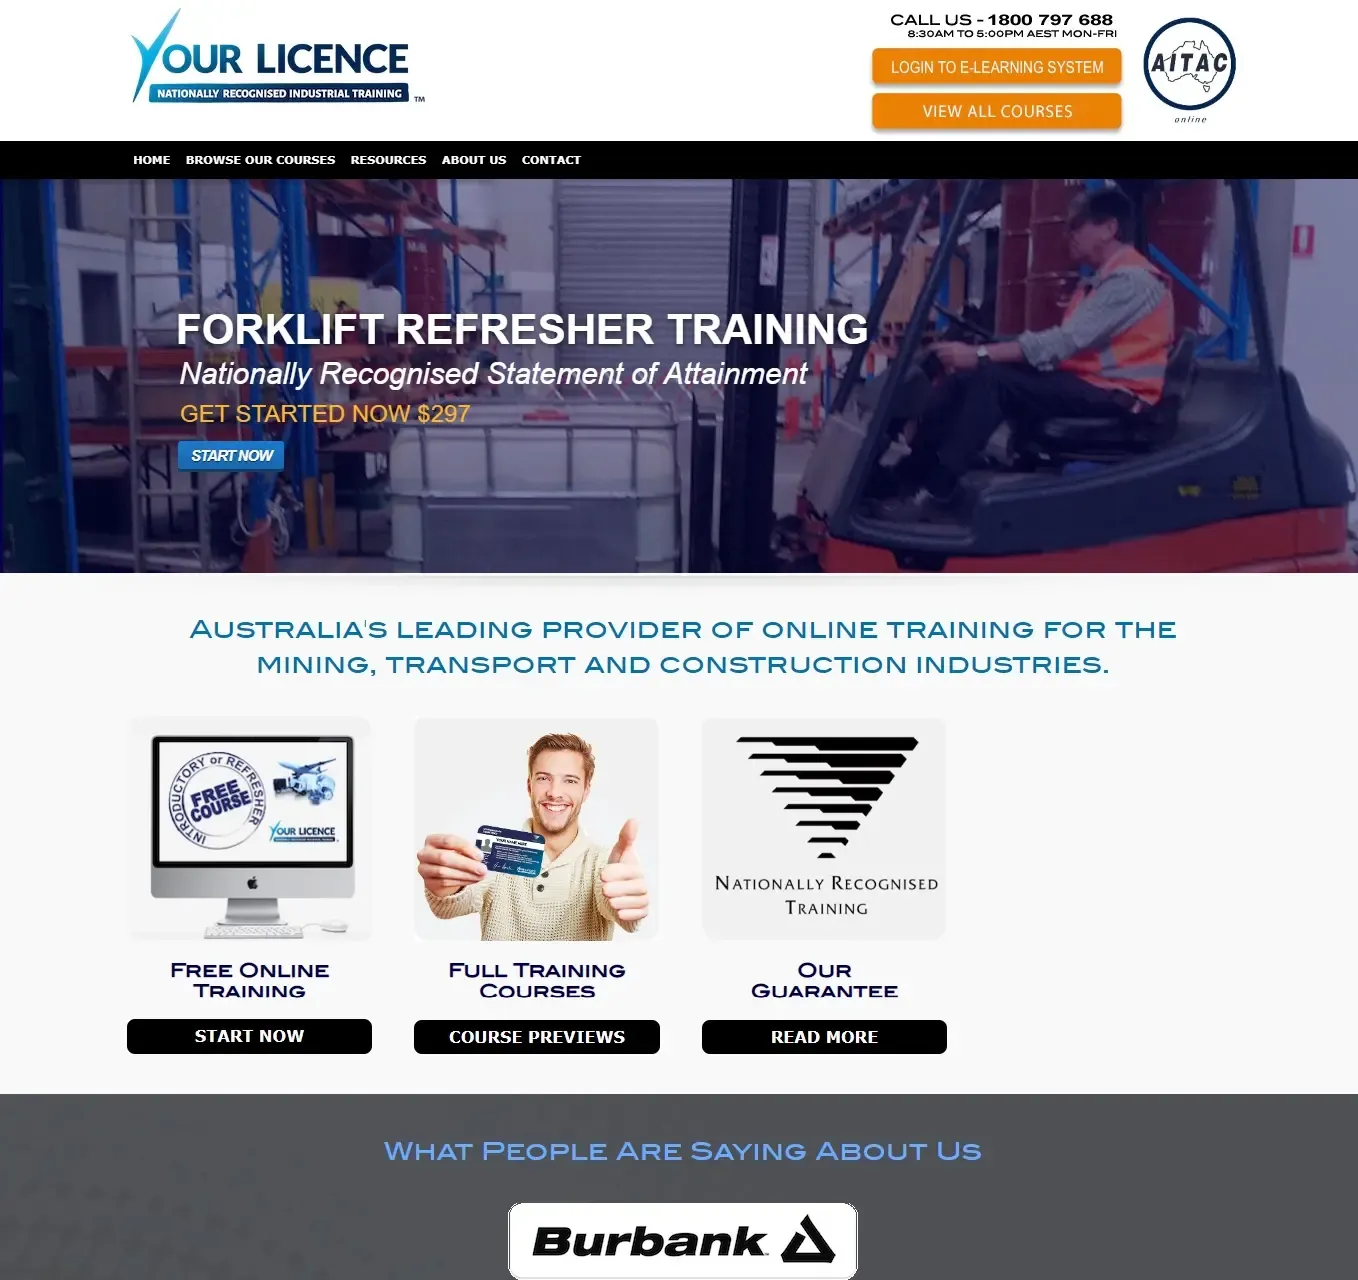 Your Licence Pty Ltd